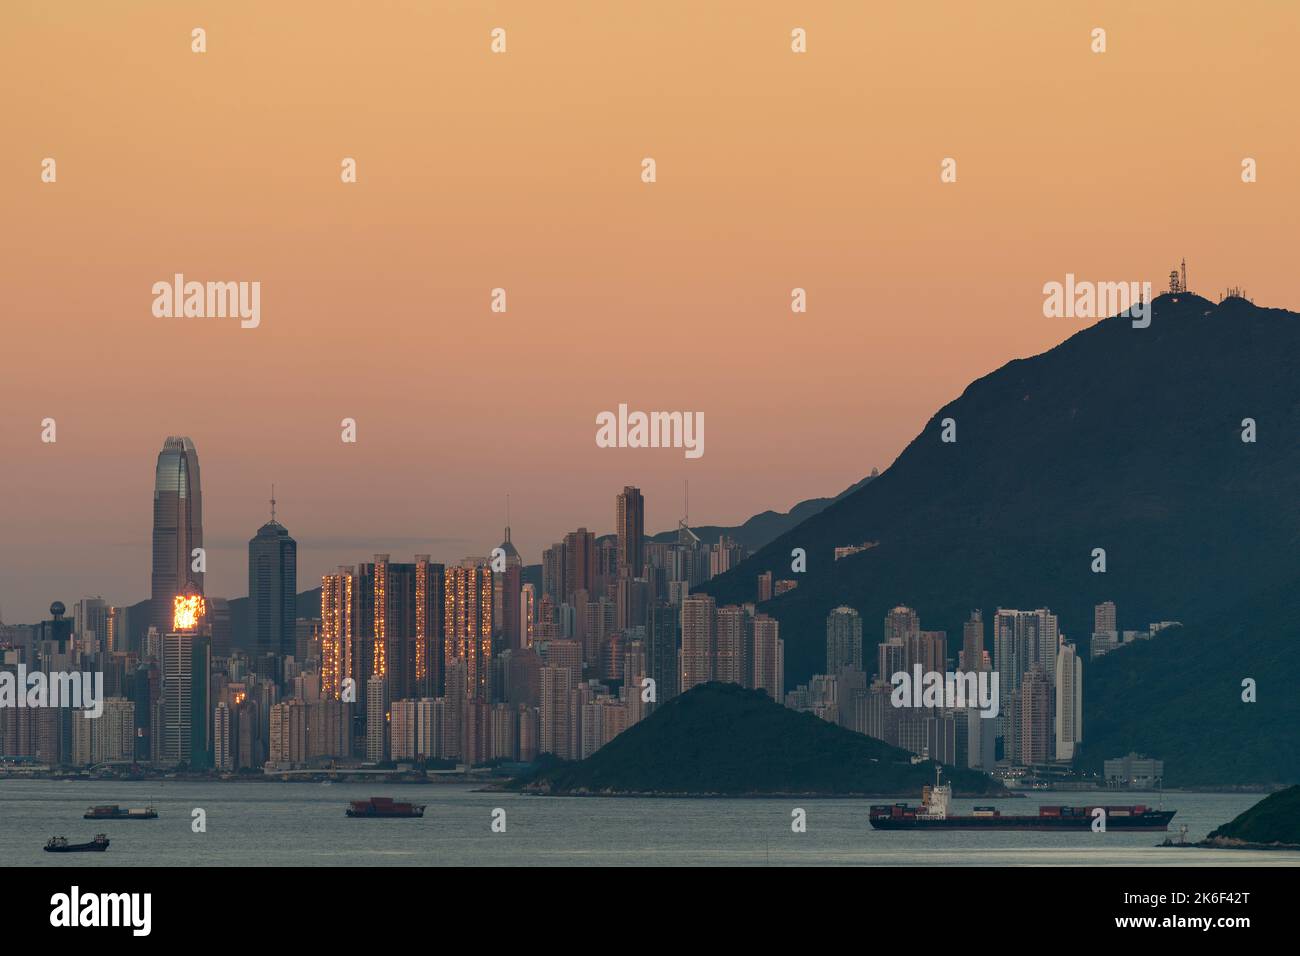 The setting sun is reflected in the high-rise buildings of Hong Kong Island, seen against the orange sky of the Belt of Venus phenomenon Stock Photo